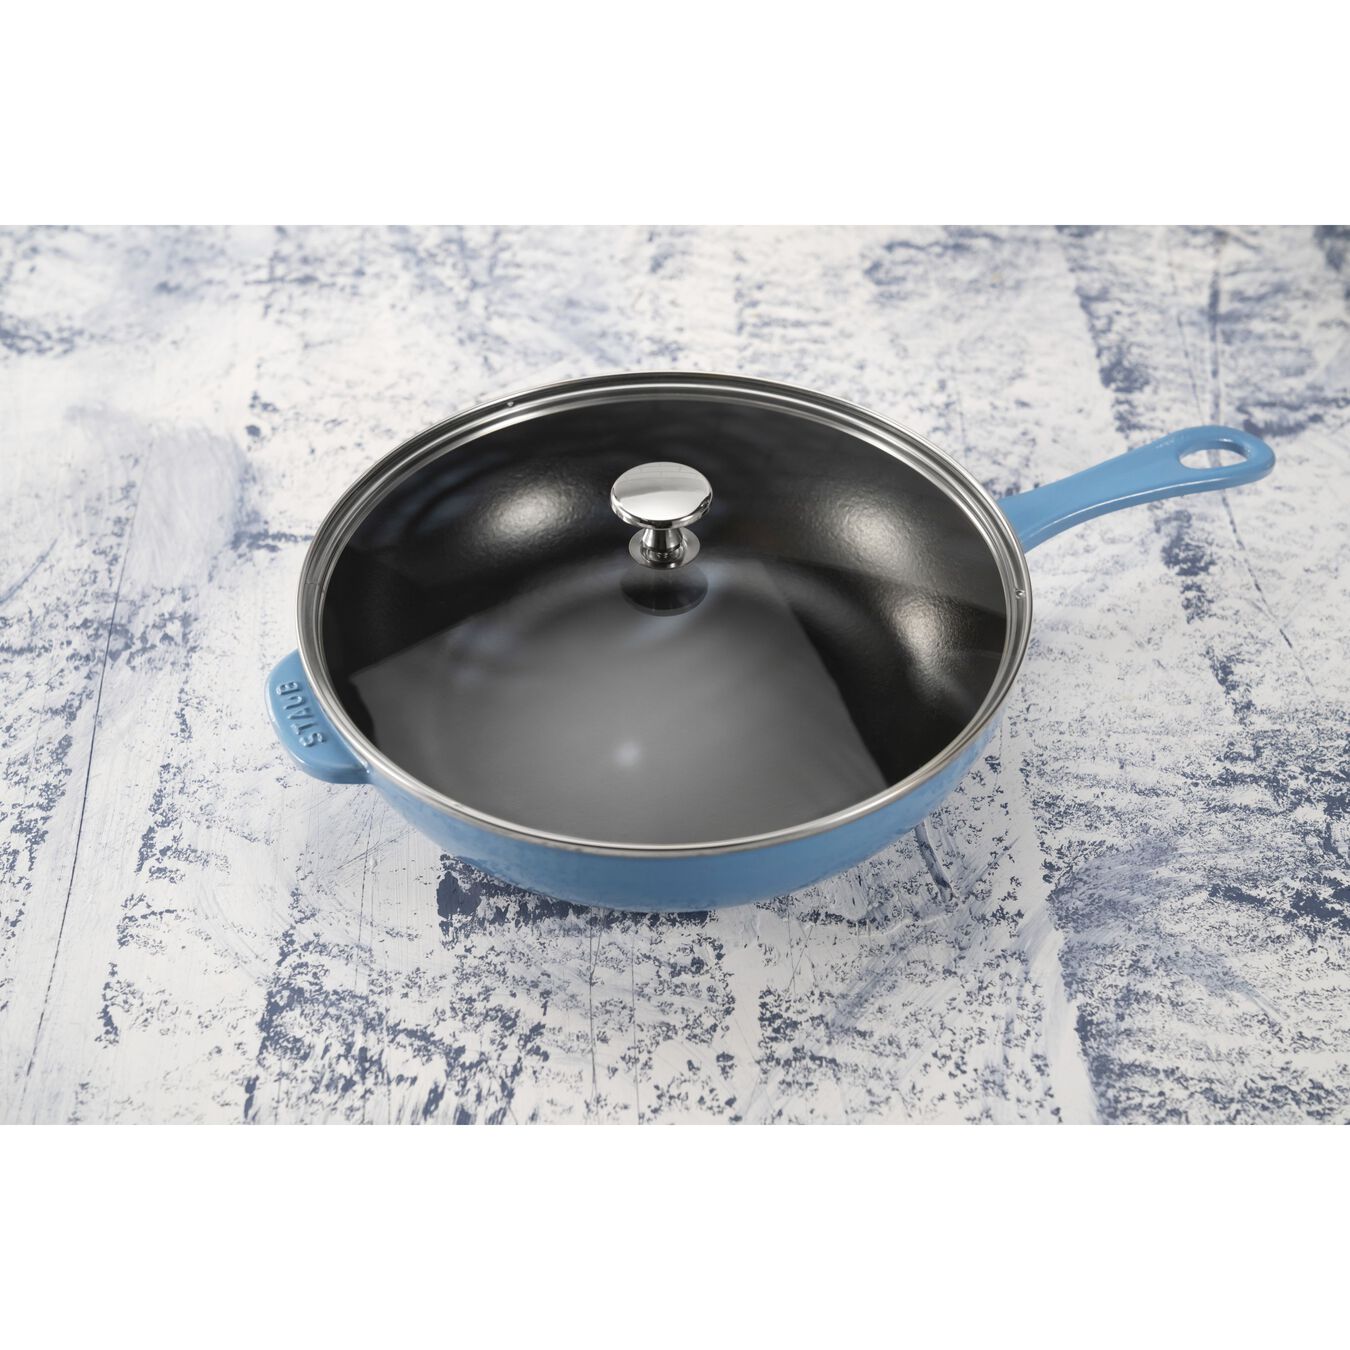 26 cm / 10 inch cast iron DAILY PAN WITH GLASS LID, ice-blue - Visual Imperfections,,large 4